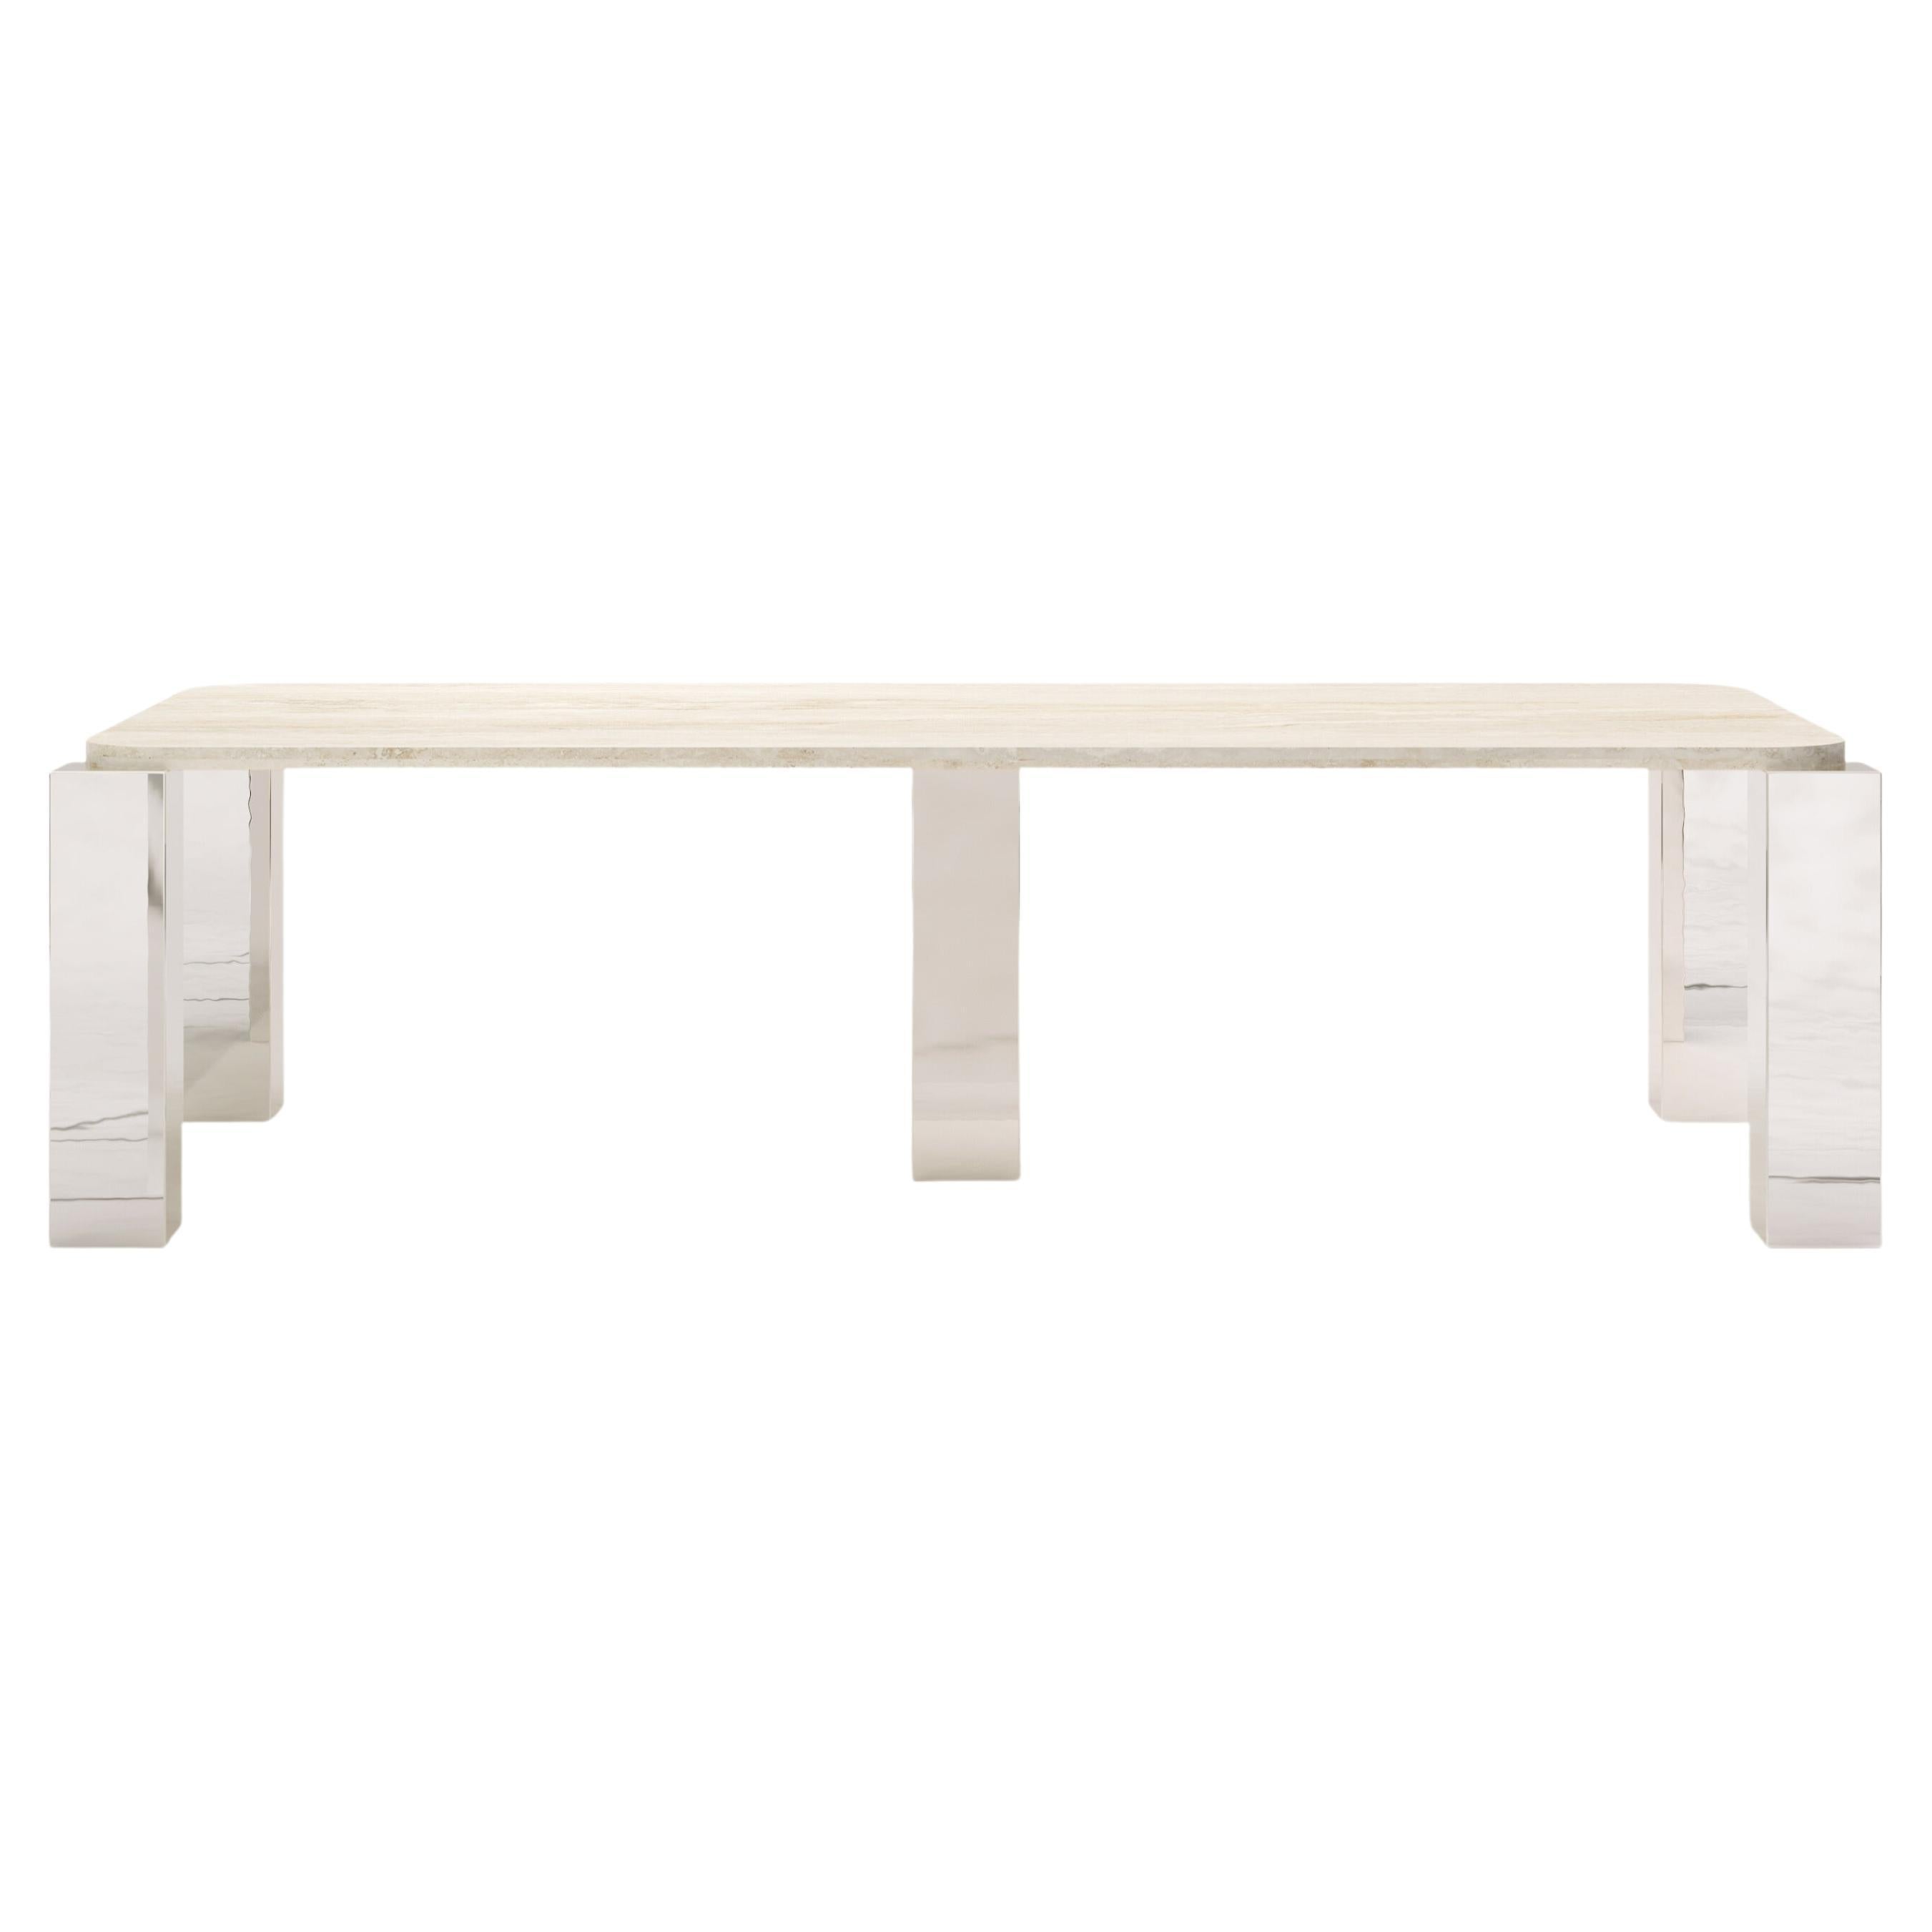 FORM(LA) Cubo Rectangle Dining Table 120”L x 50”W x 30”H Travertino & Chrome For Sale